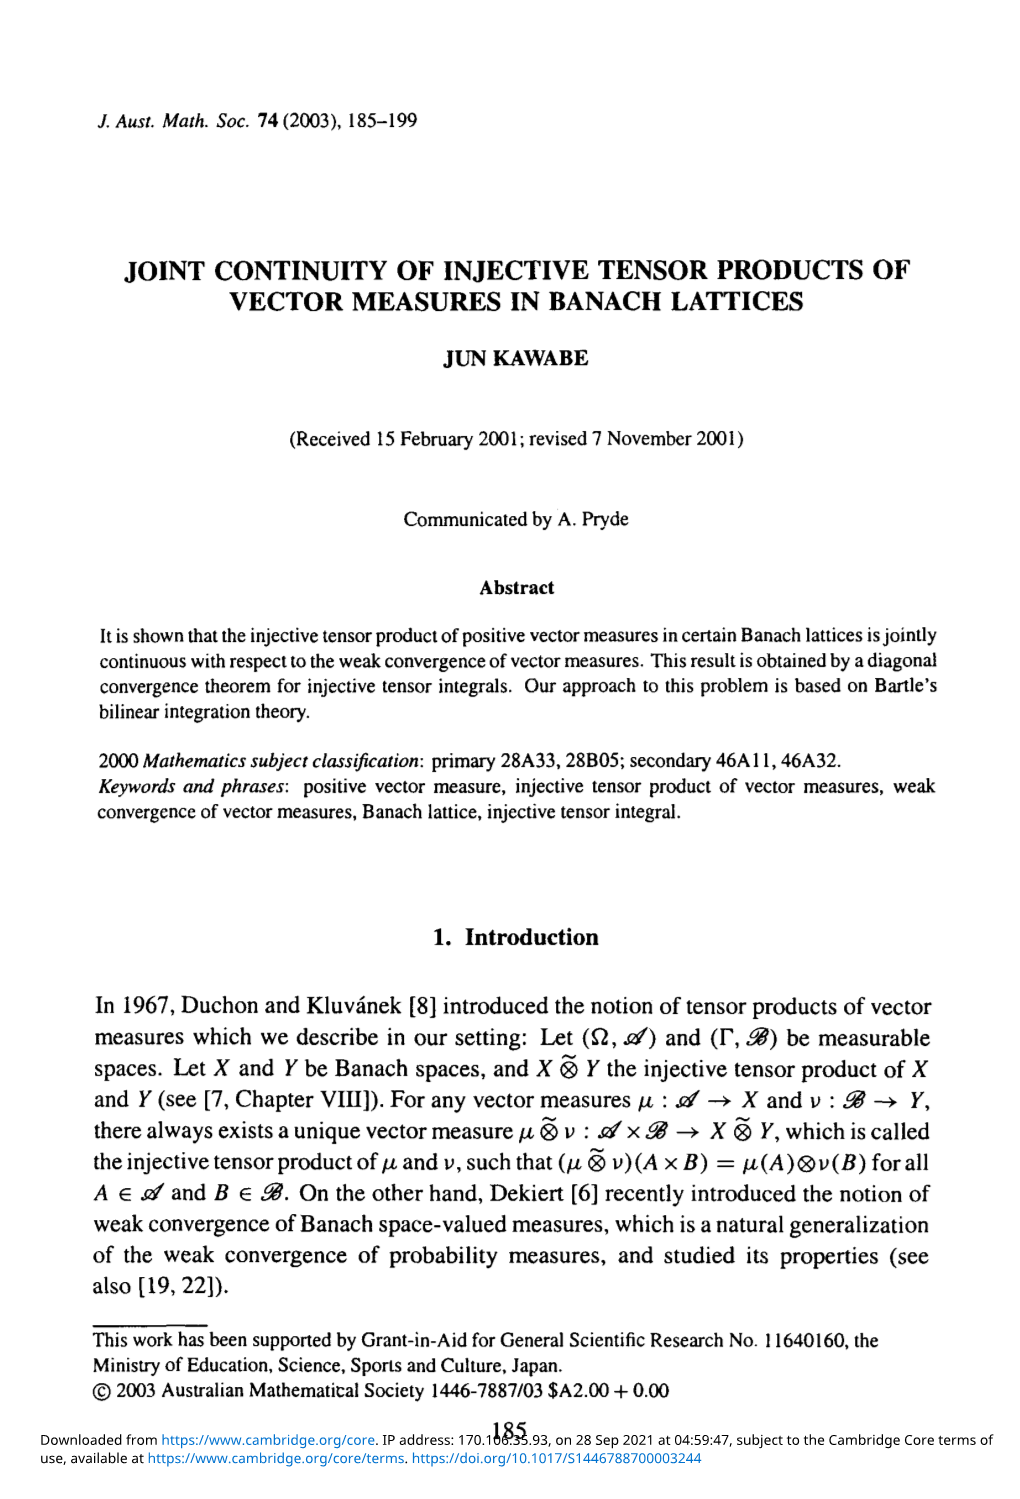 Joint Continuity of Injective Tensor Products of Vector Measures in Banach Lattices